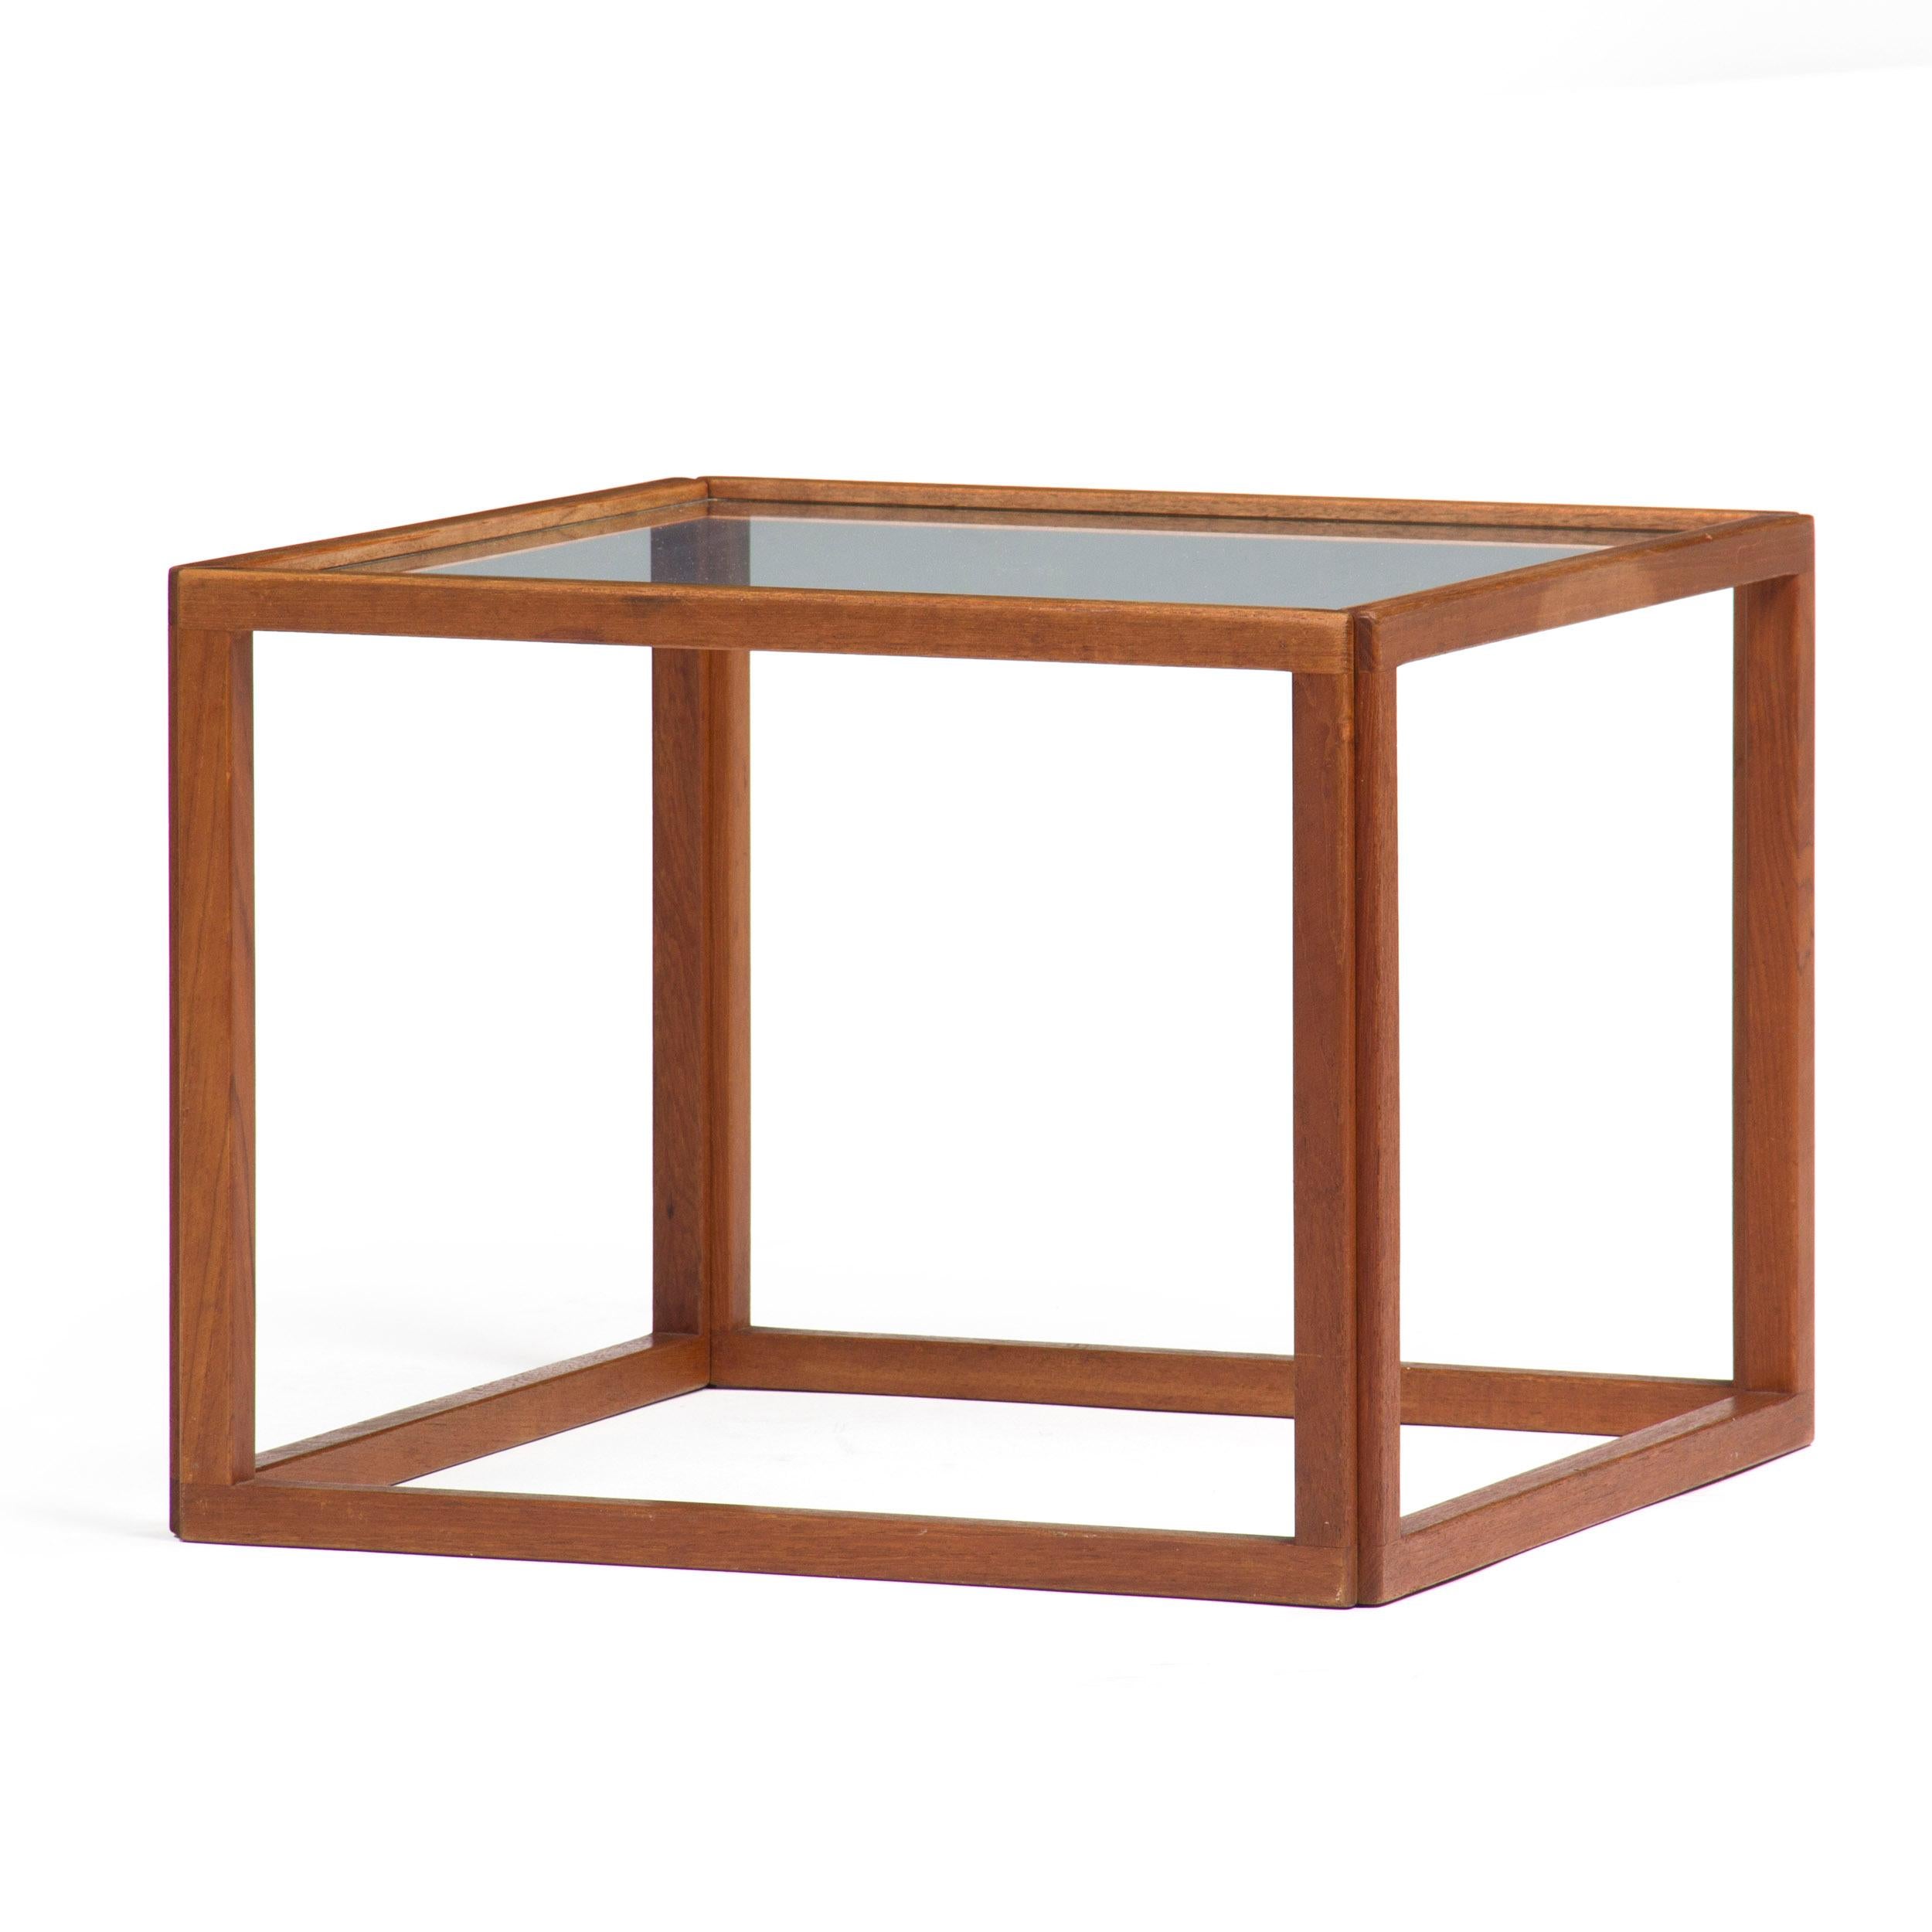 A solid teak open cube side table with a glass top. Designed by Kai Kristiansen and manufactured in Denmark in the 1950s.